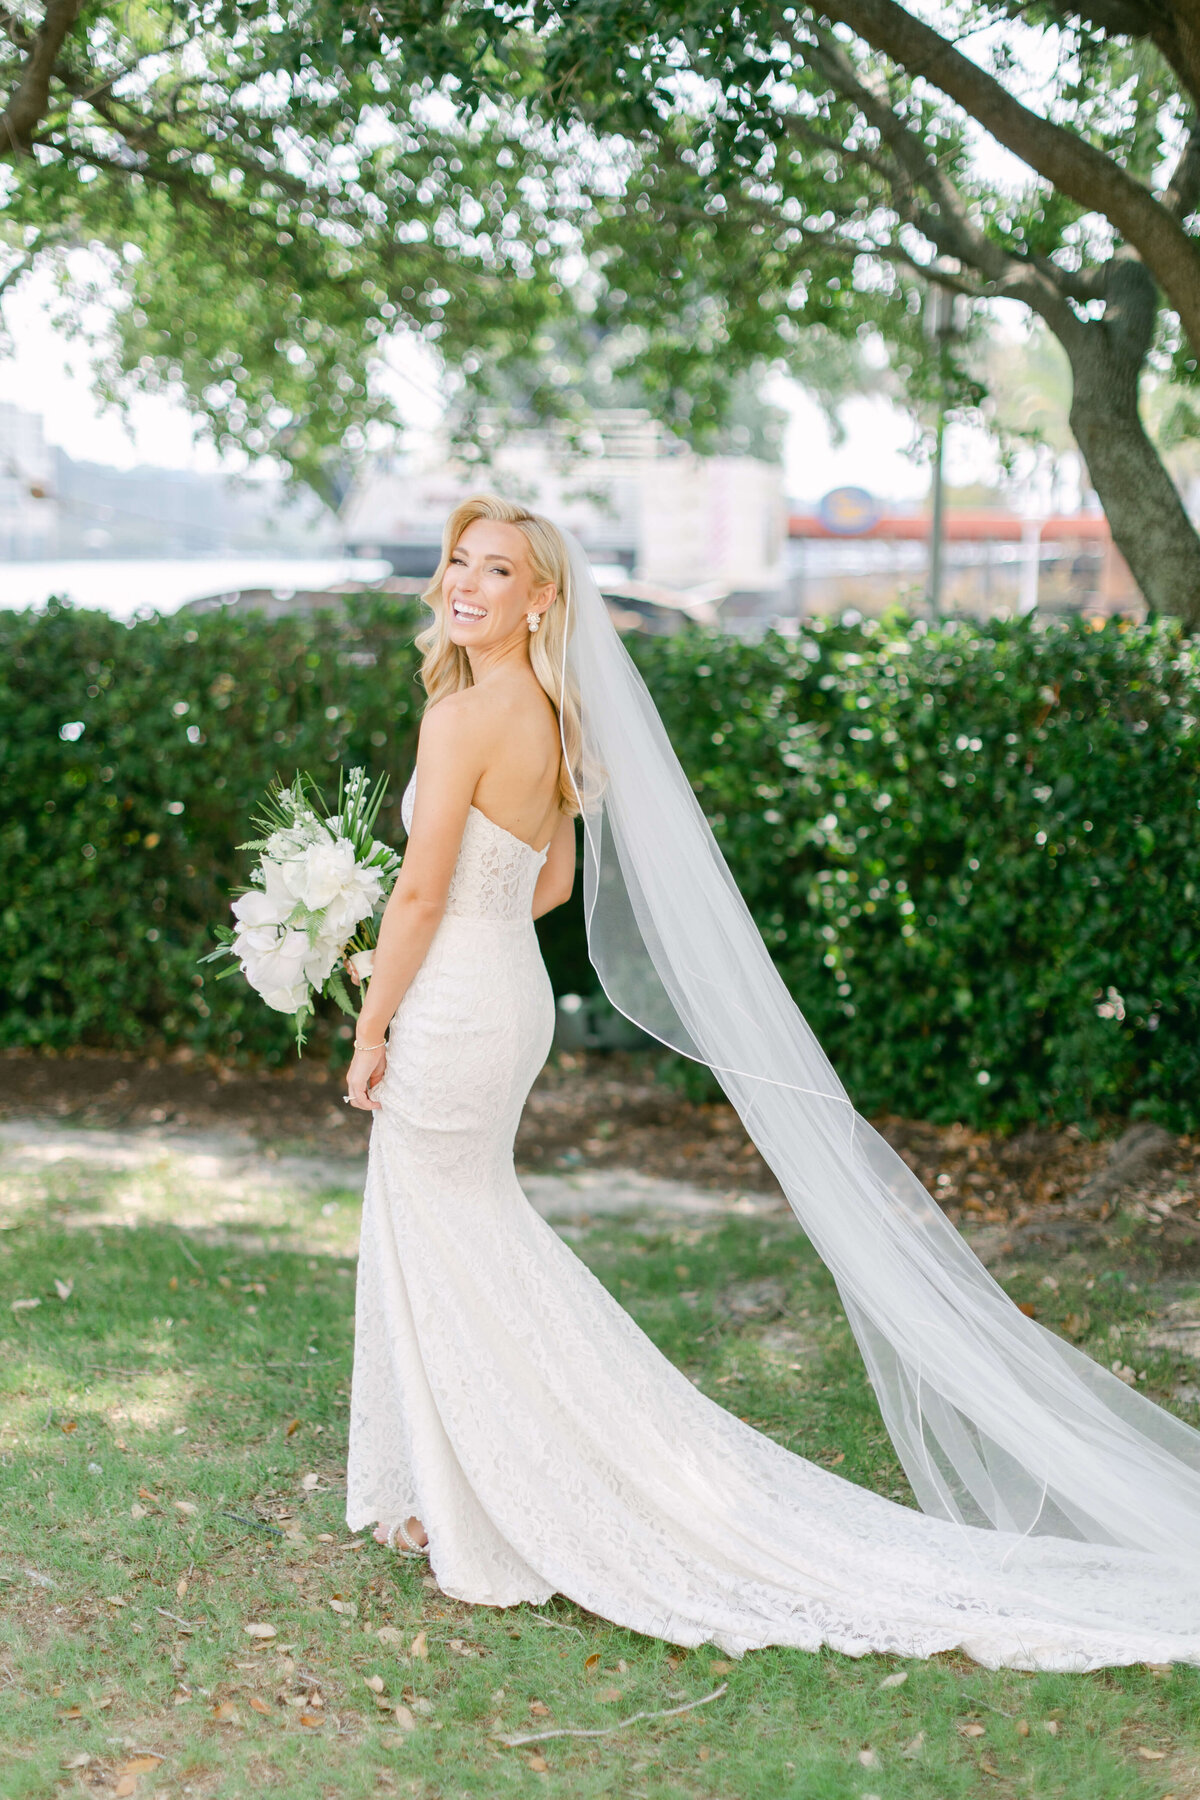 A bride walks in the grass while smiling